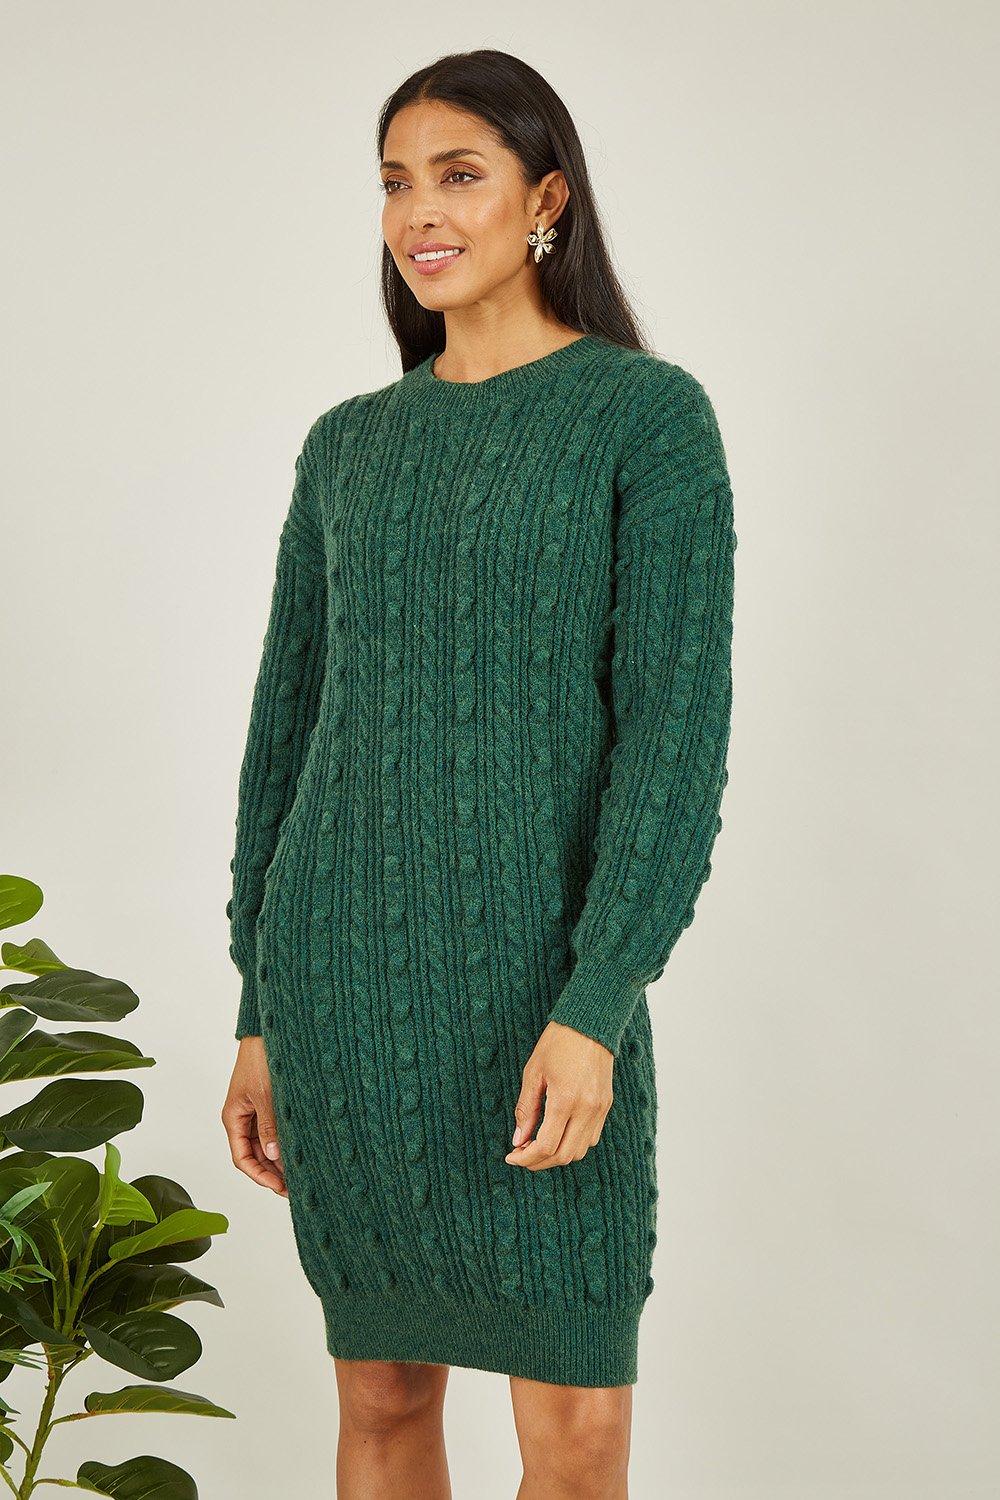 Green Cable Knit Tunic Dress